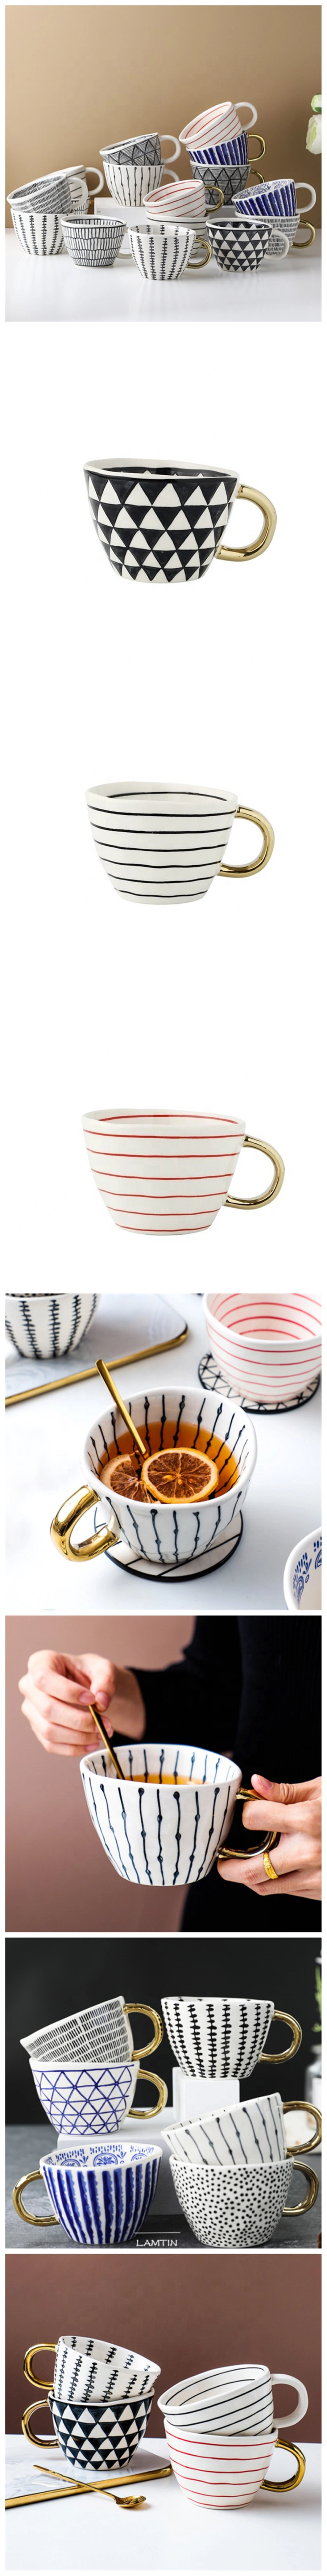 American Irregular Geometric Ceramic Coffee Cup with Gold Plated Handle Black and White Pattern Milk Tea Cup Home Accessories